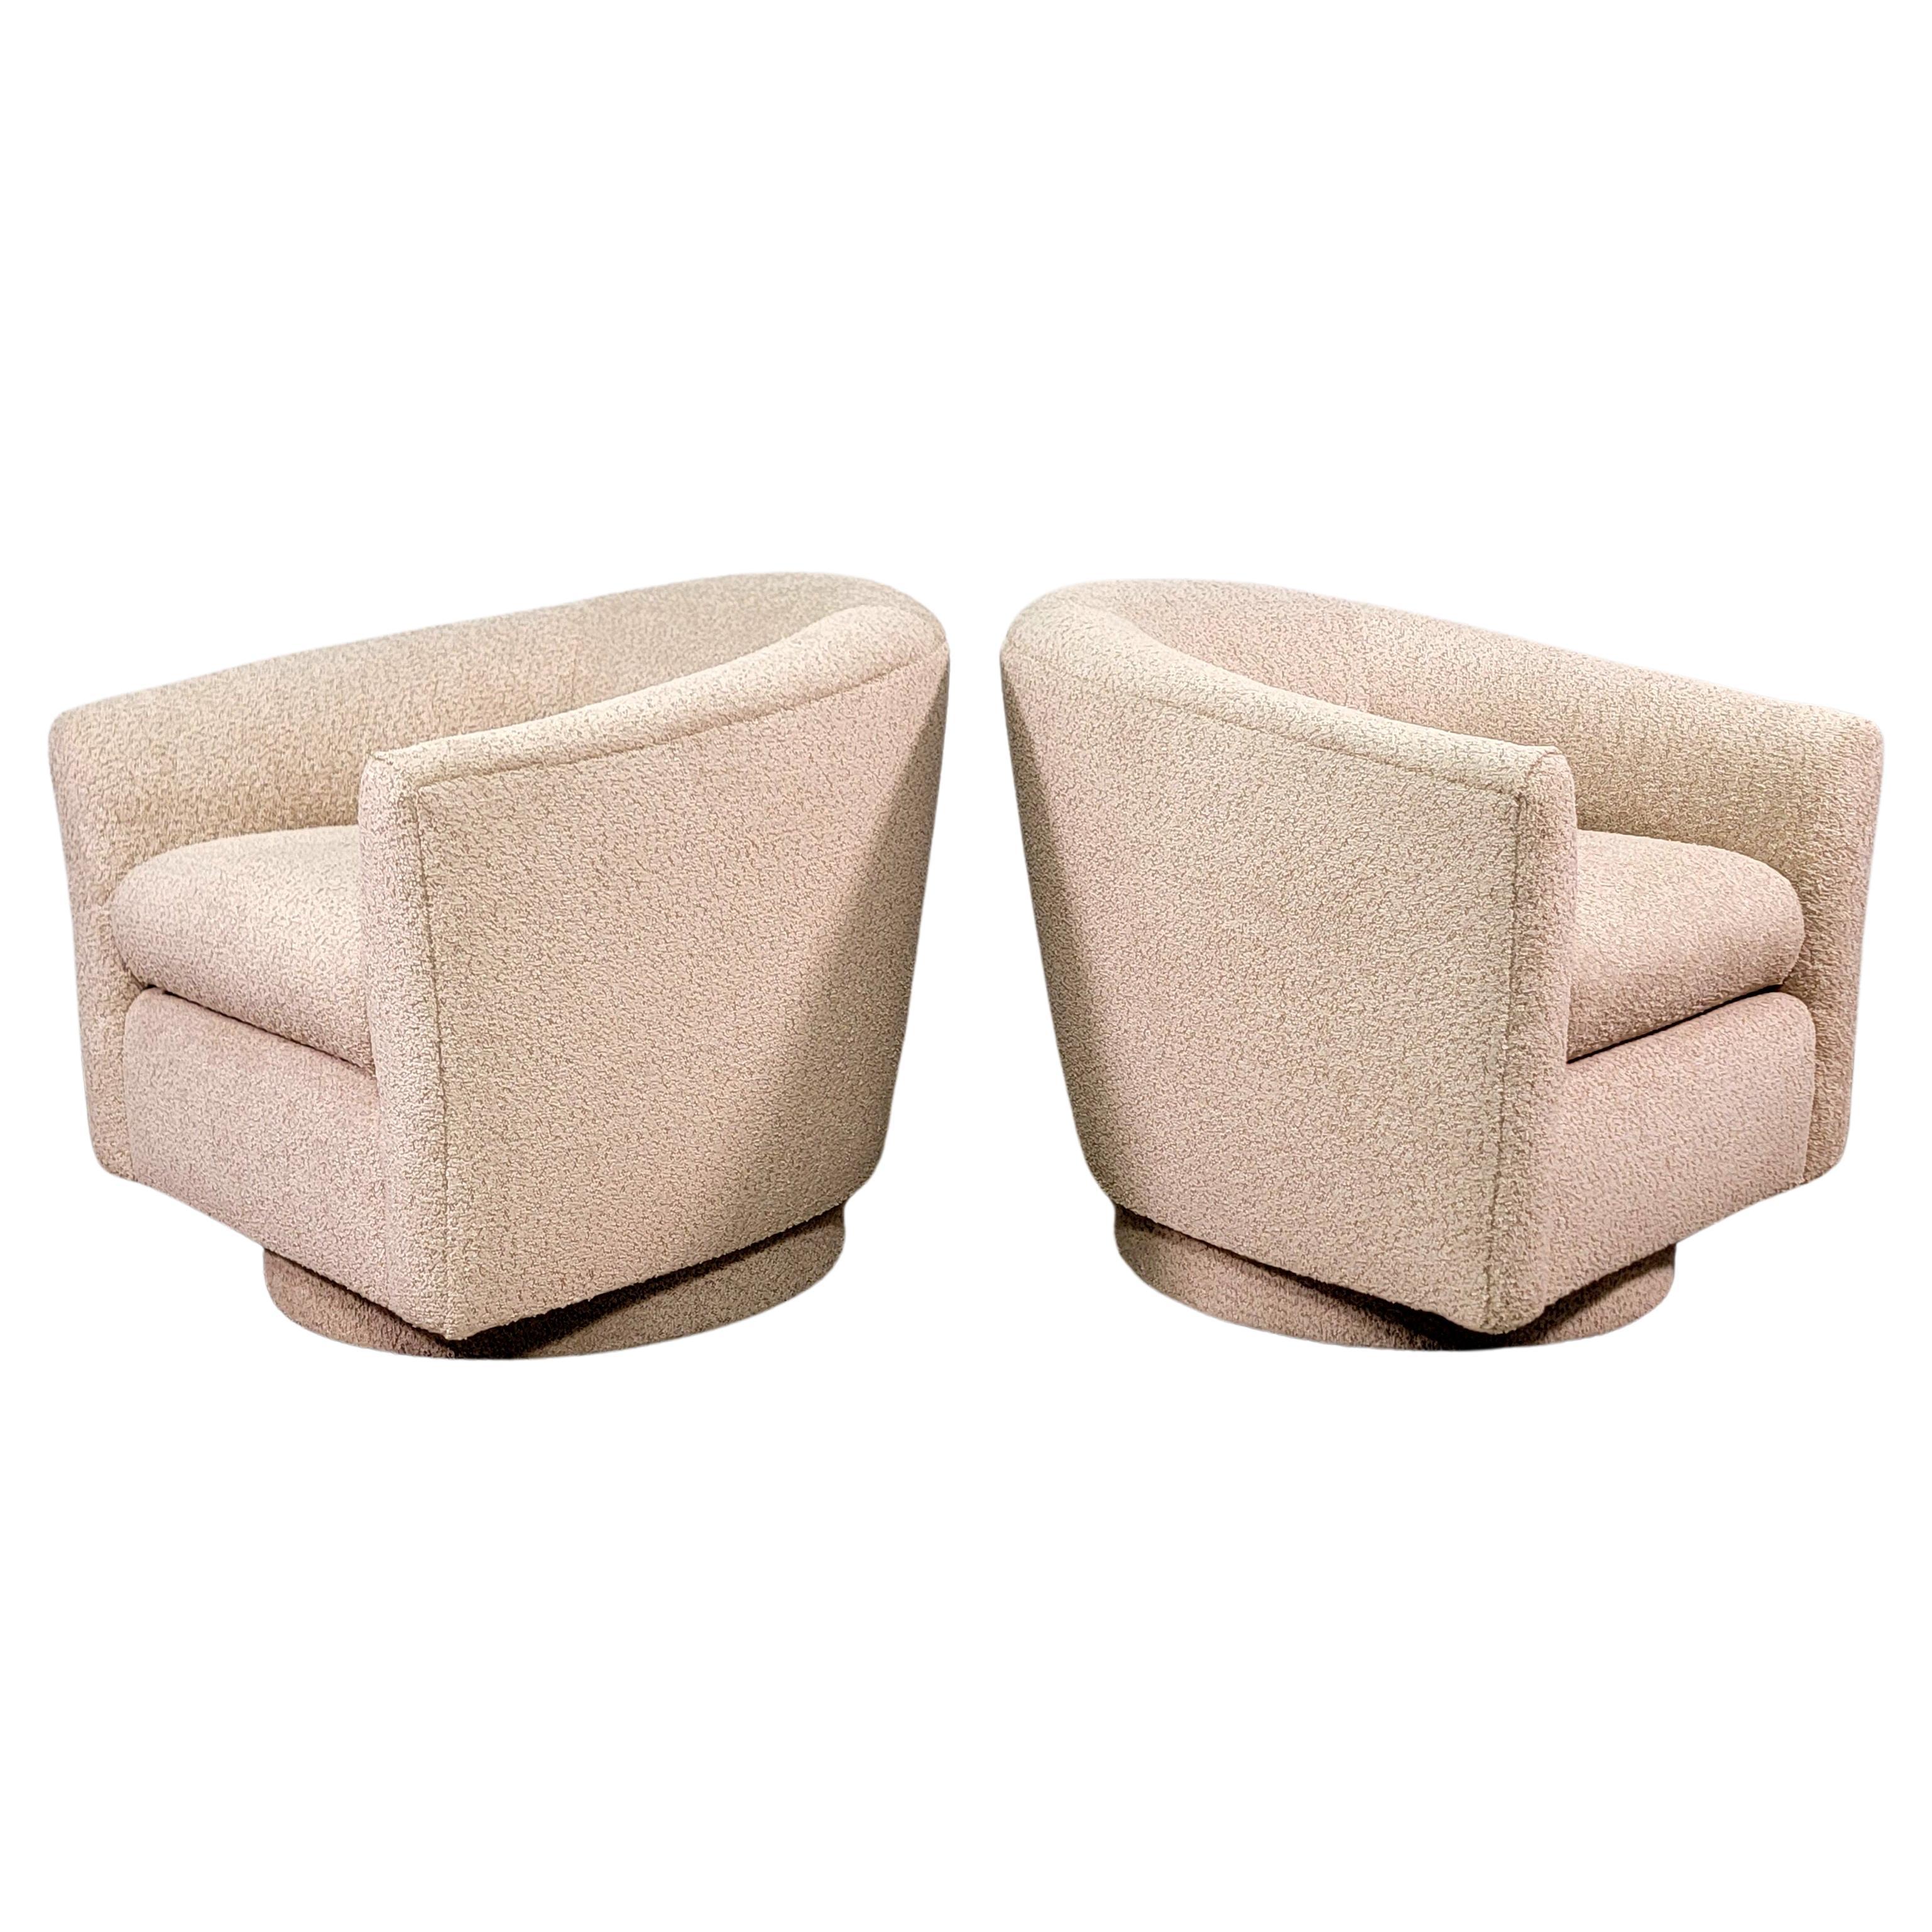 Swivel Chairs in Bouclé in the Style of Milo Baughman, 1970s For Sale 1